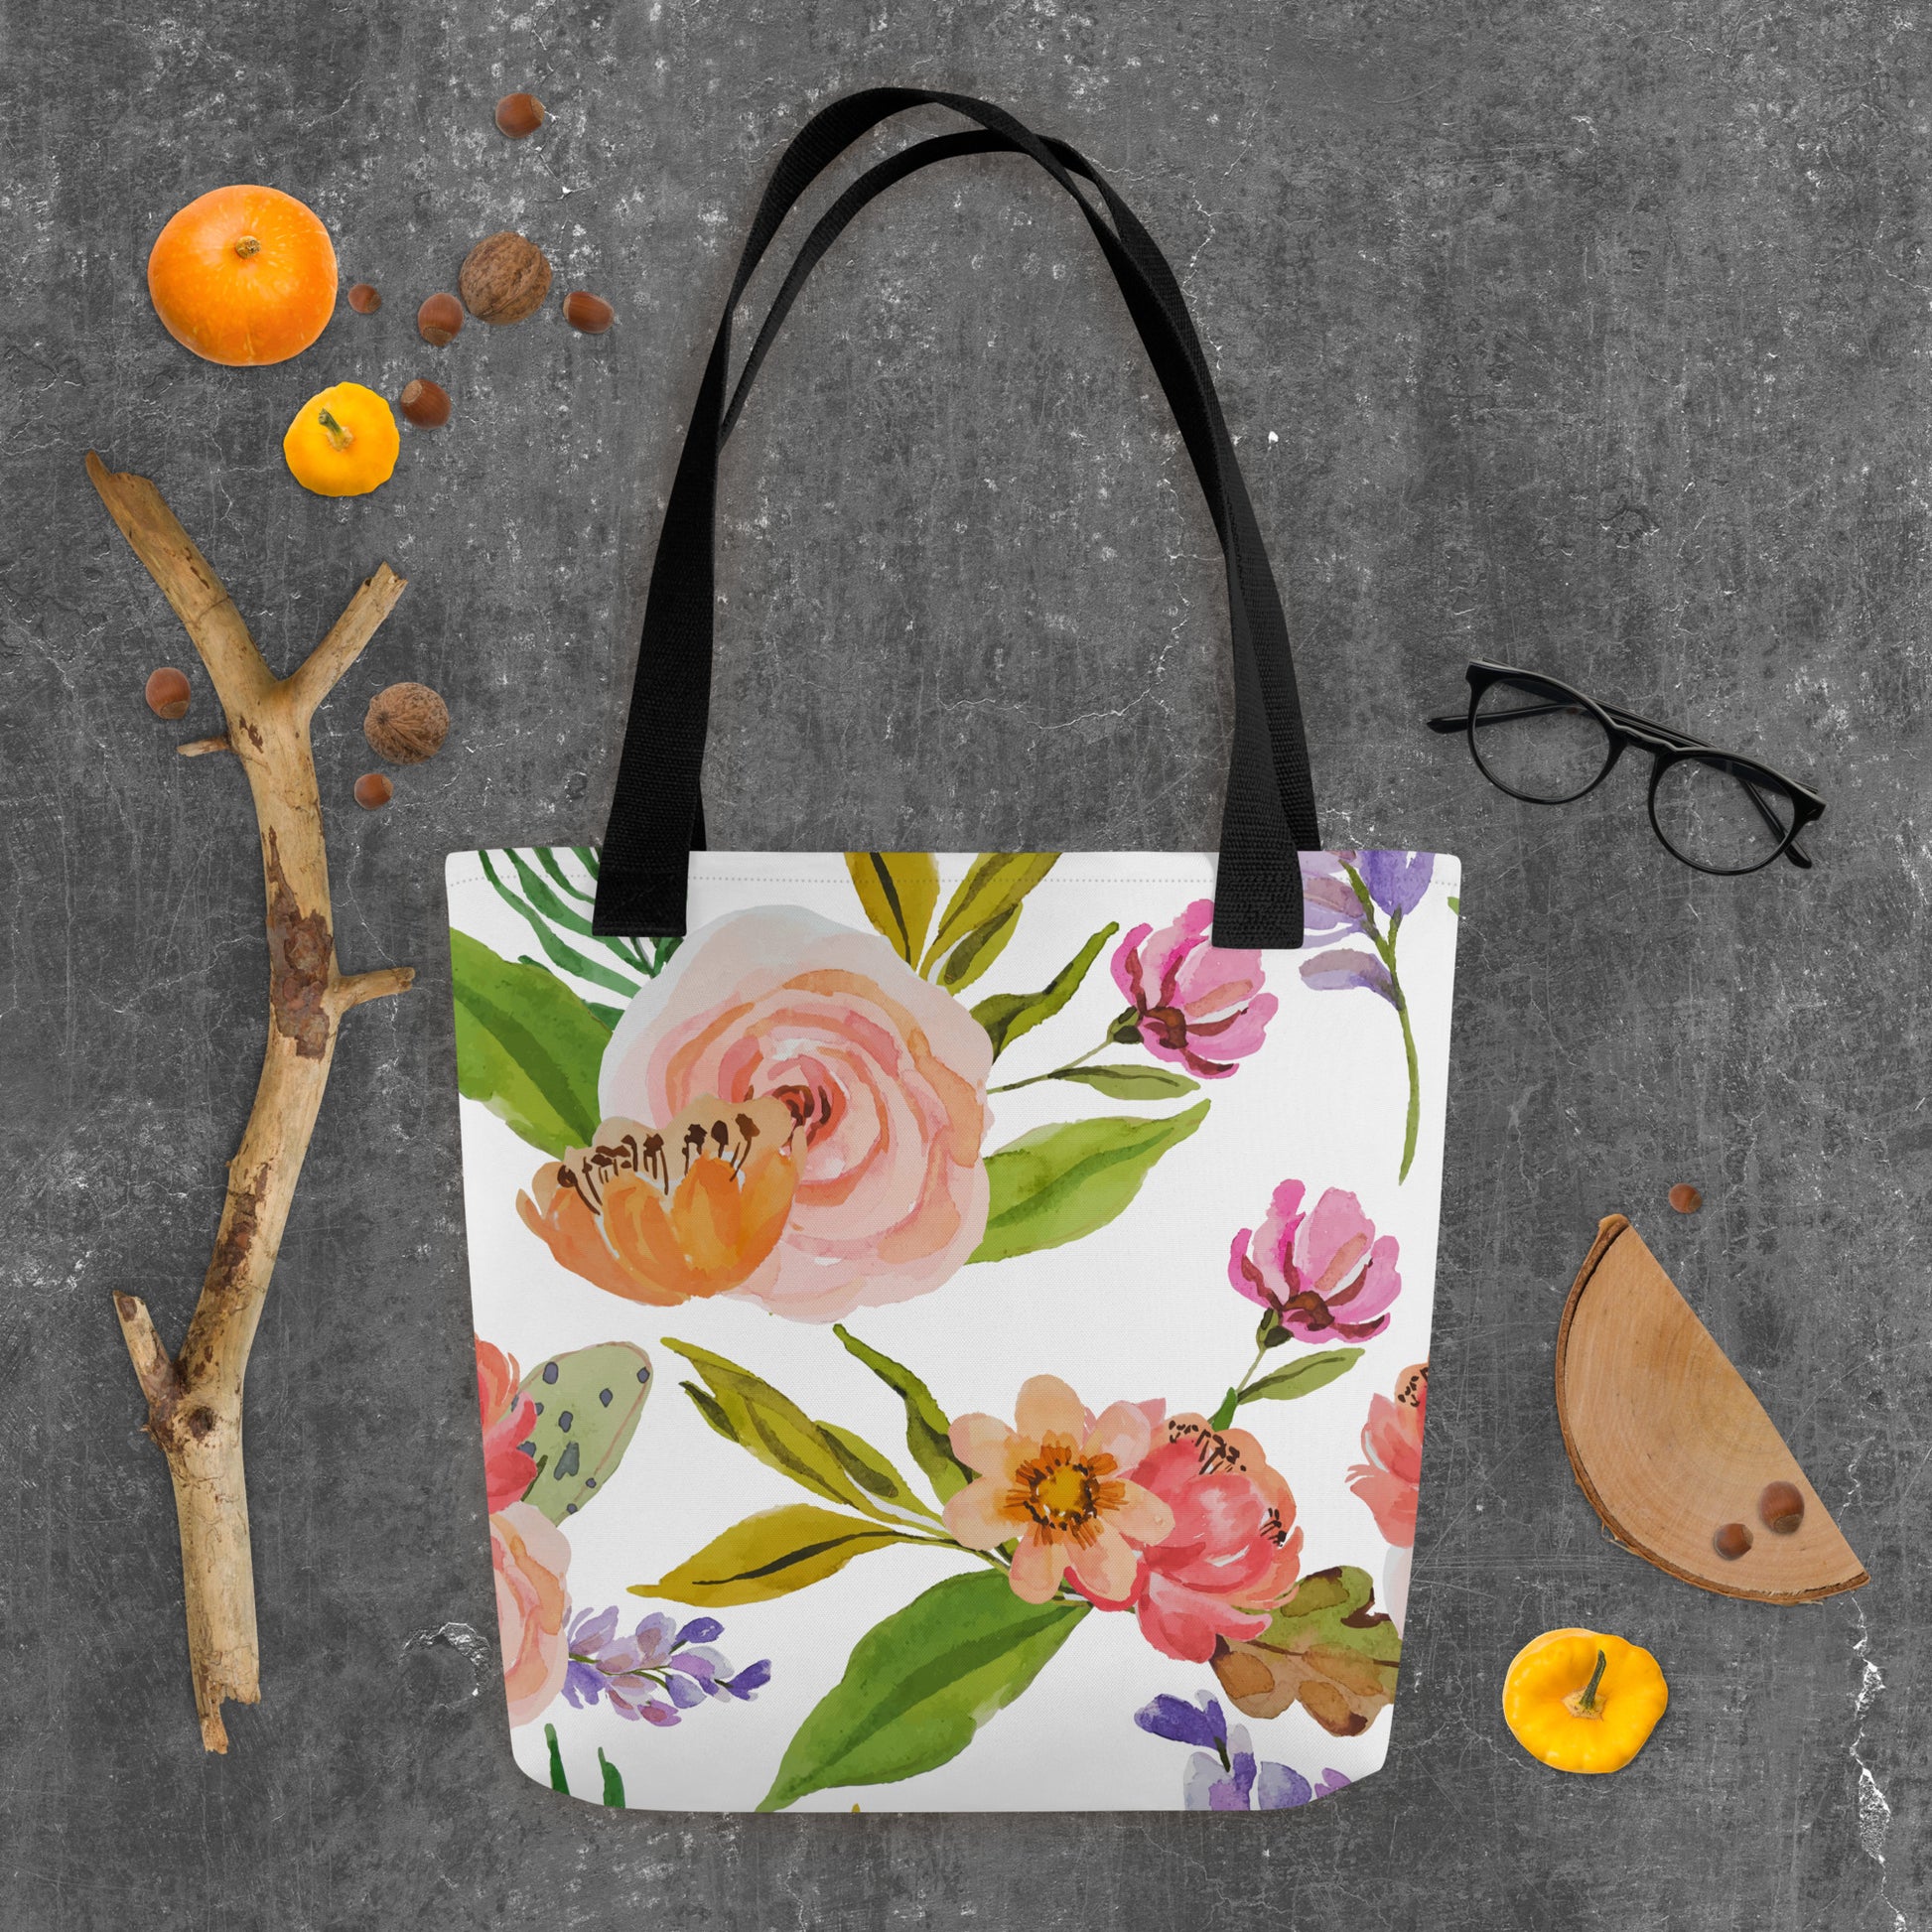 Cloth bag with floral pattern